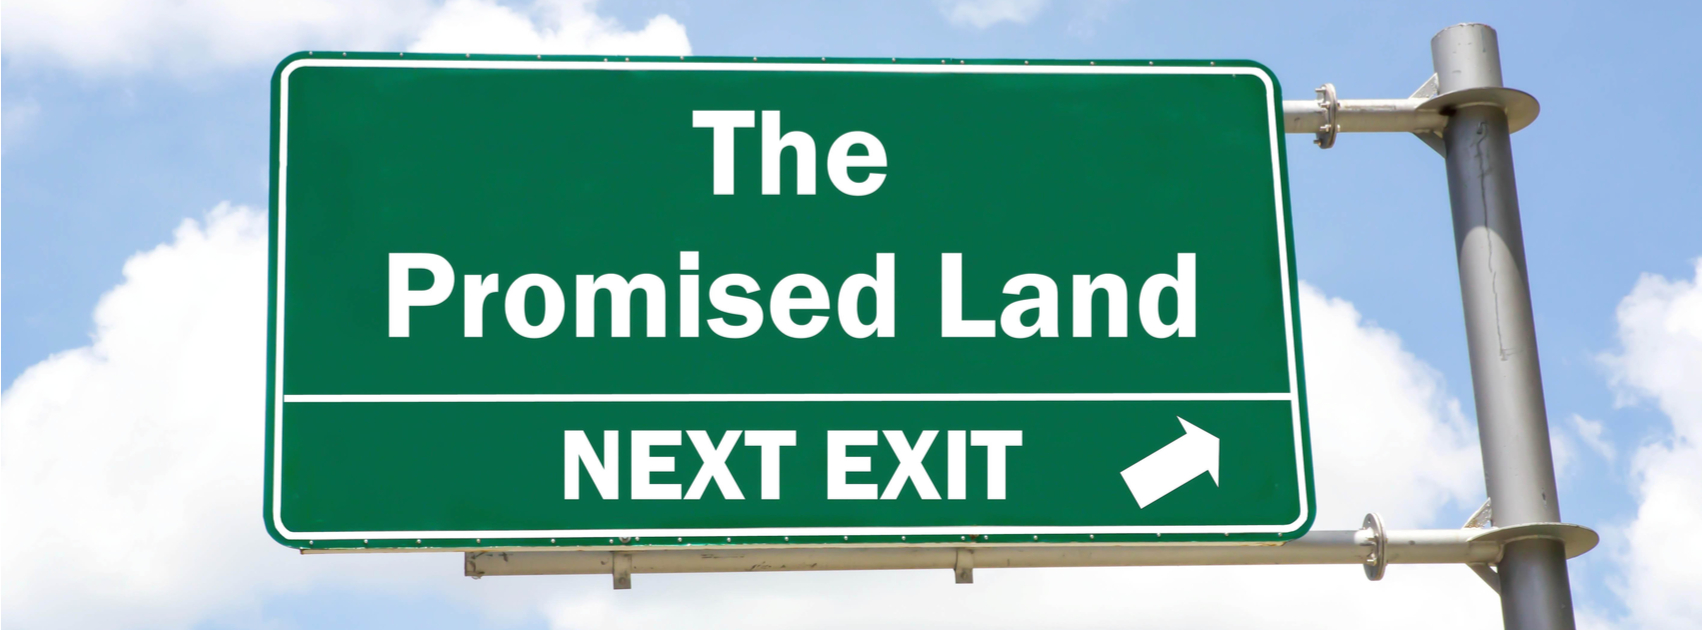 What Is the Promised Land in the Bible?